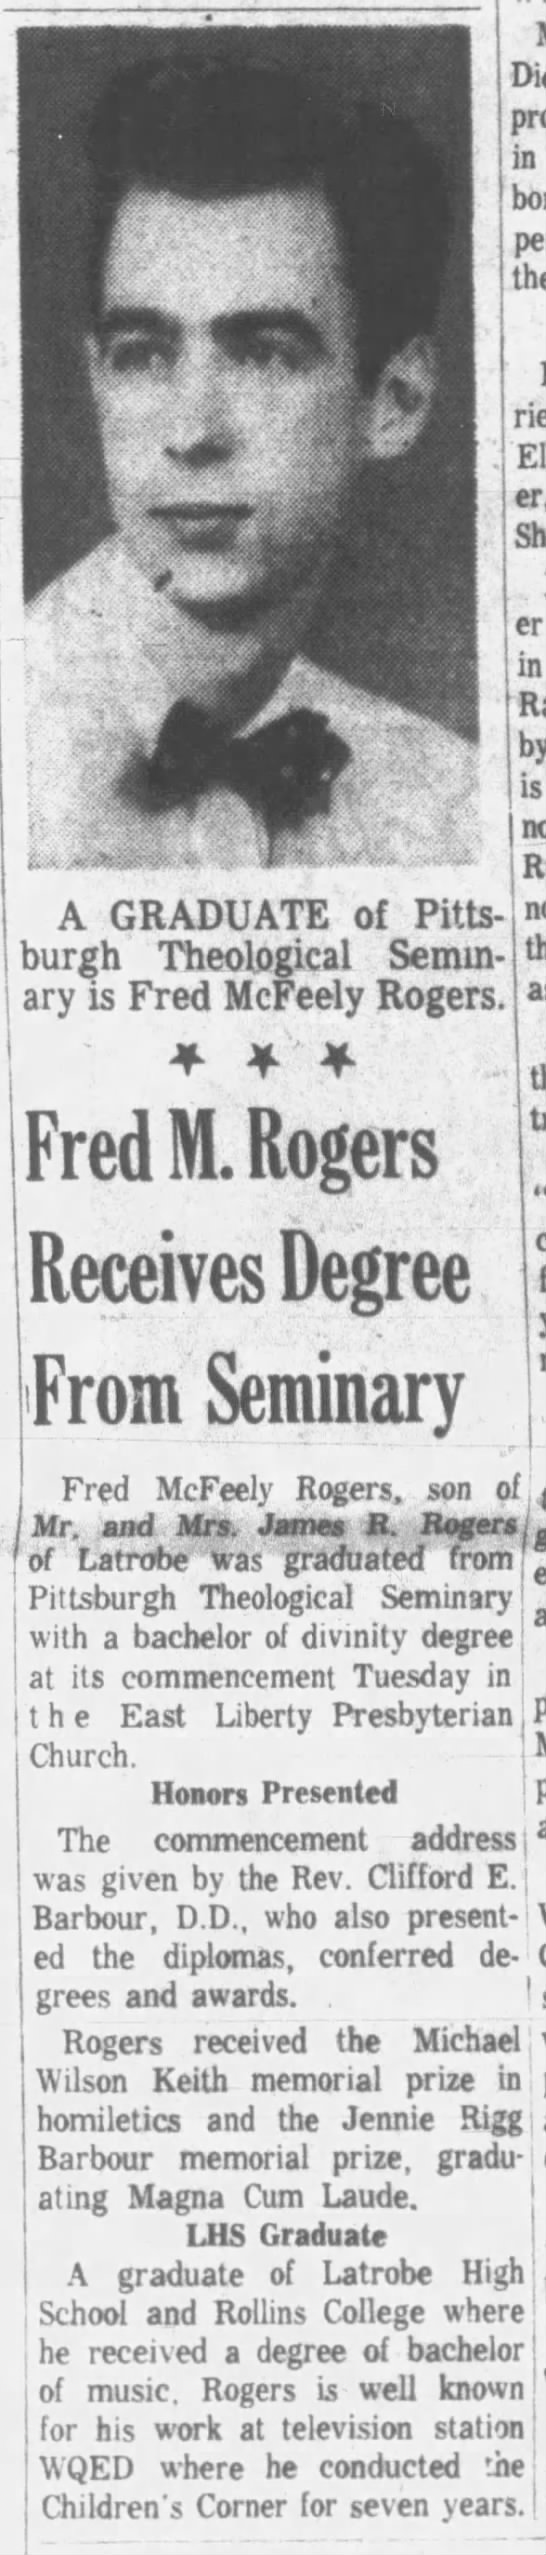 Fred Rogers graduates from Pittsburgh Theological Seminary. - 